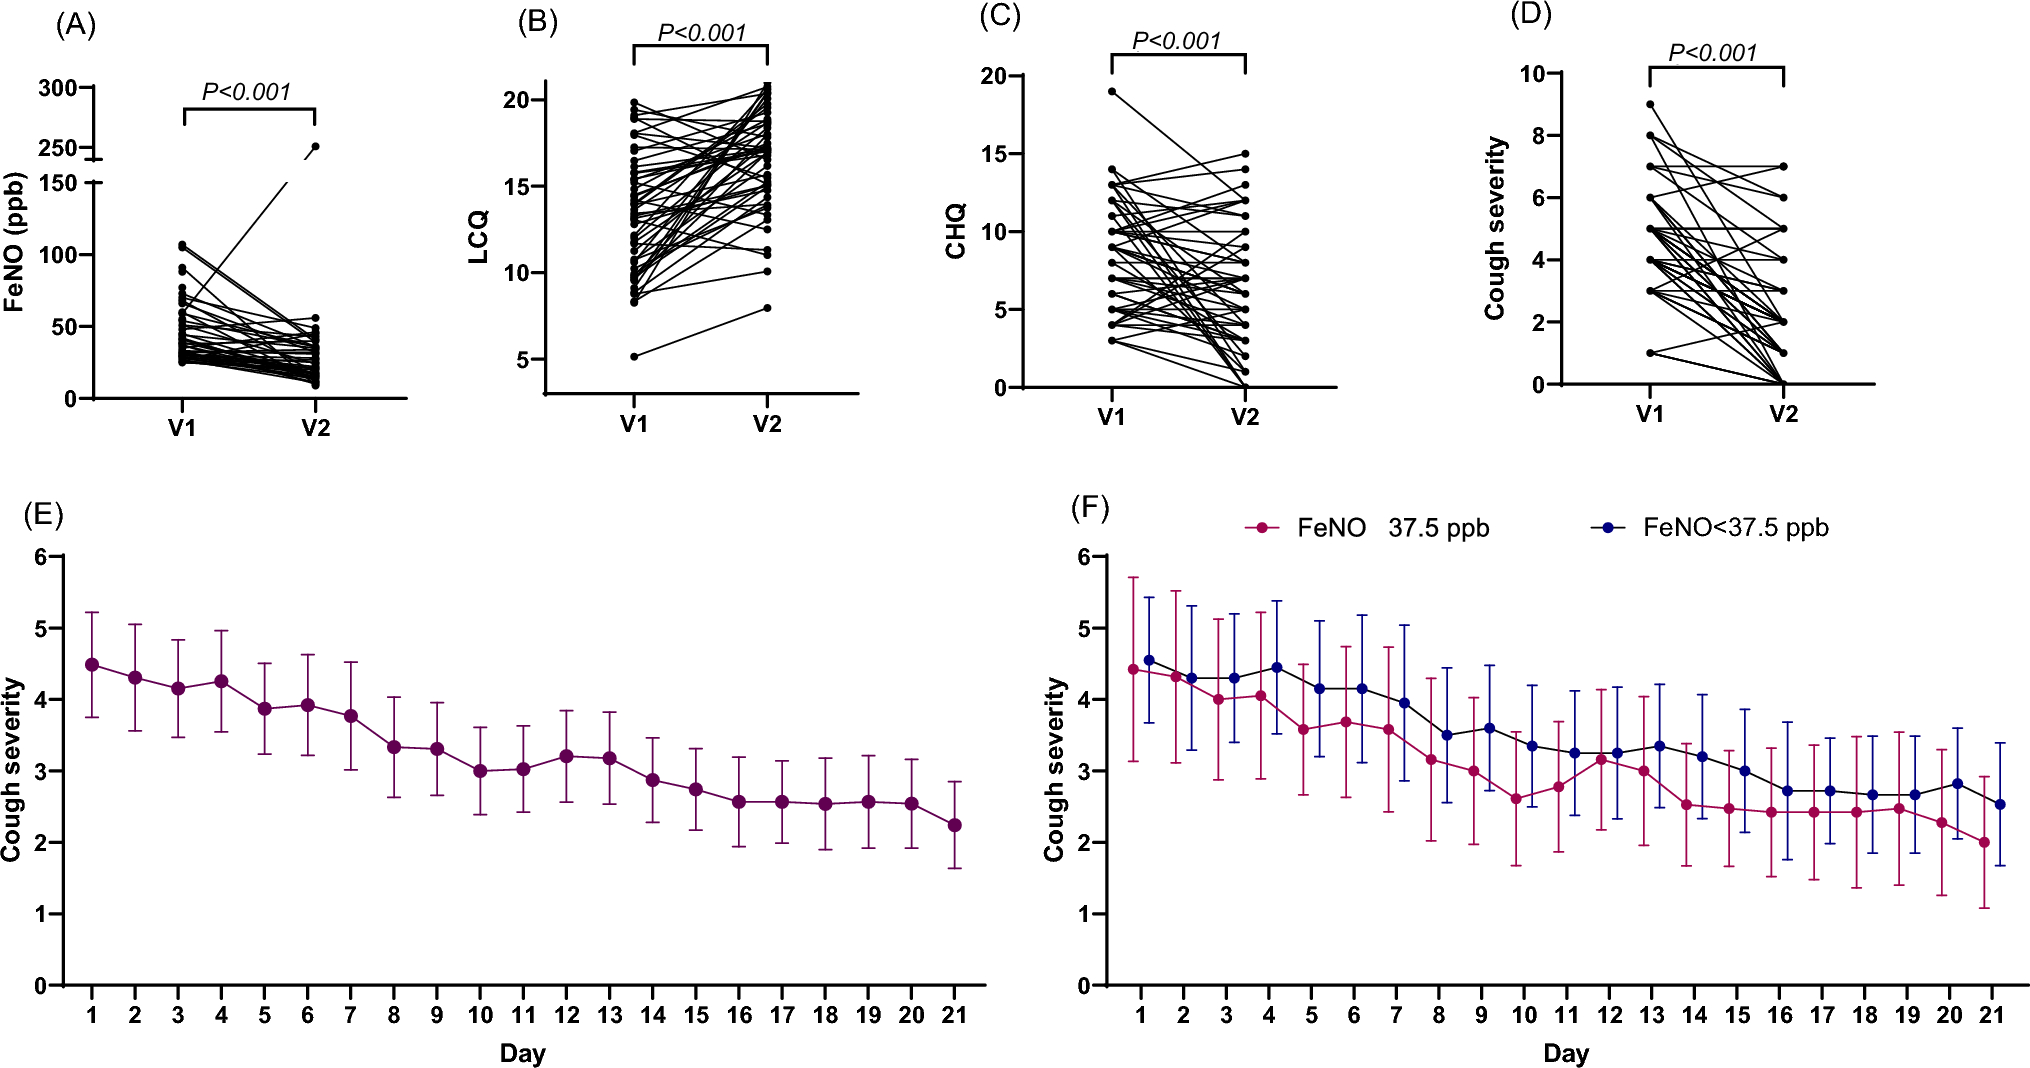 Cough Response to High-Dose Inhaled Corticosteroids in Patients with Chronic Cough and Fractional Exhaled Nitric Oxide Levels ≥ 25 ppb: A Prospective Study